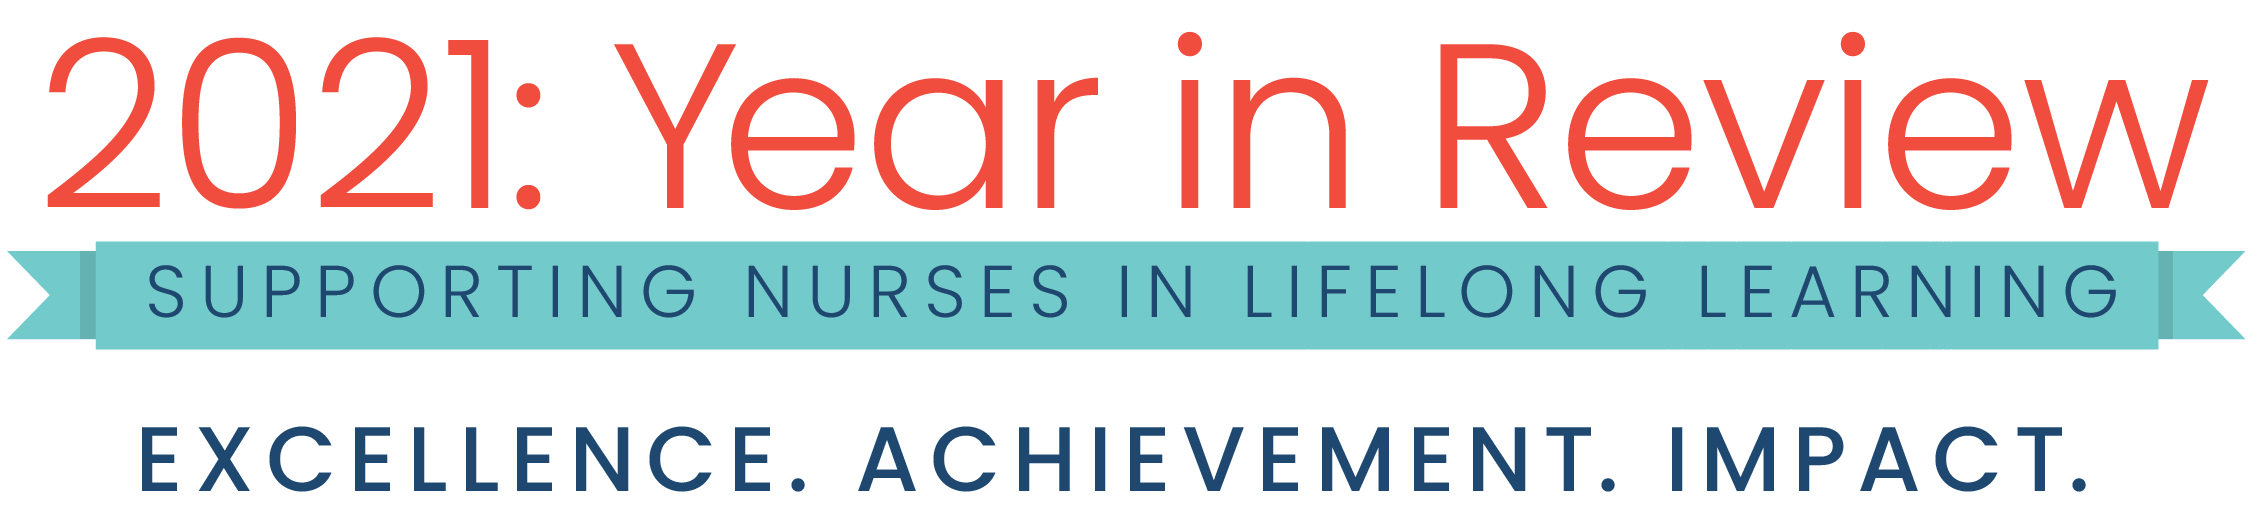 2021: Year in Review. Supporting Nurses in Lifelong Learning. Excellence. Achievement. Impact.